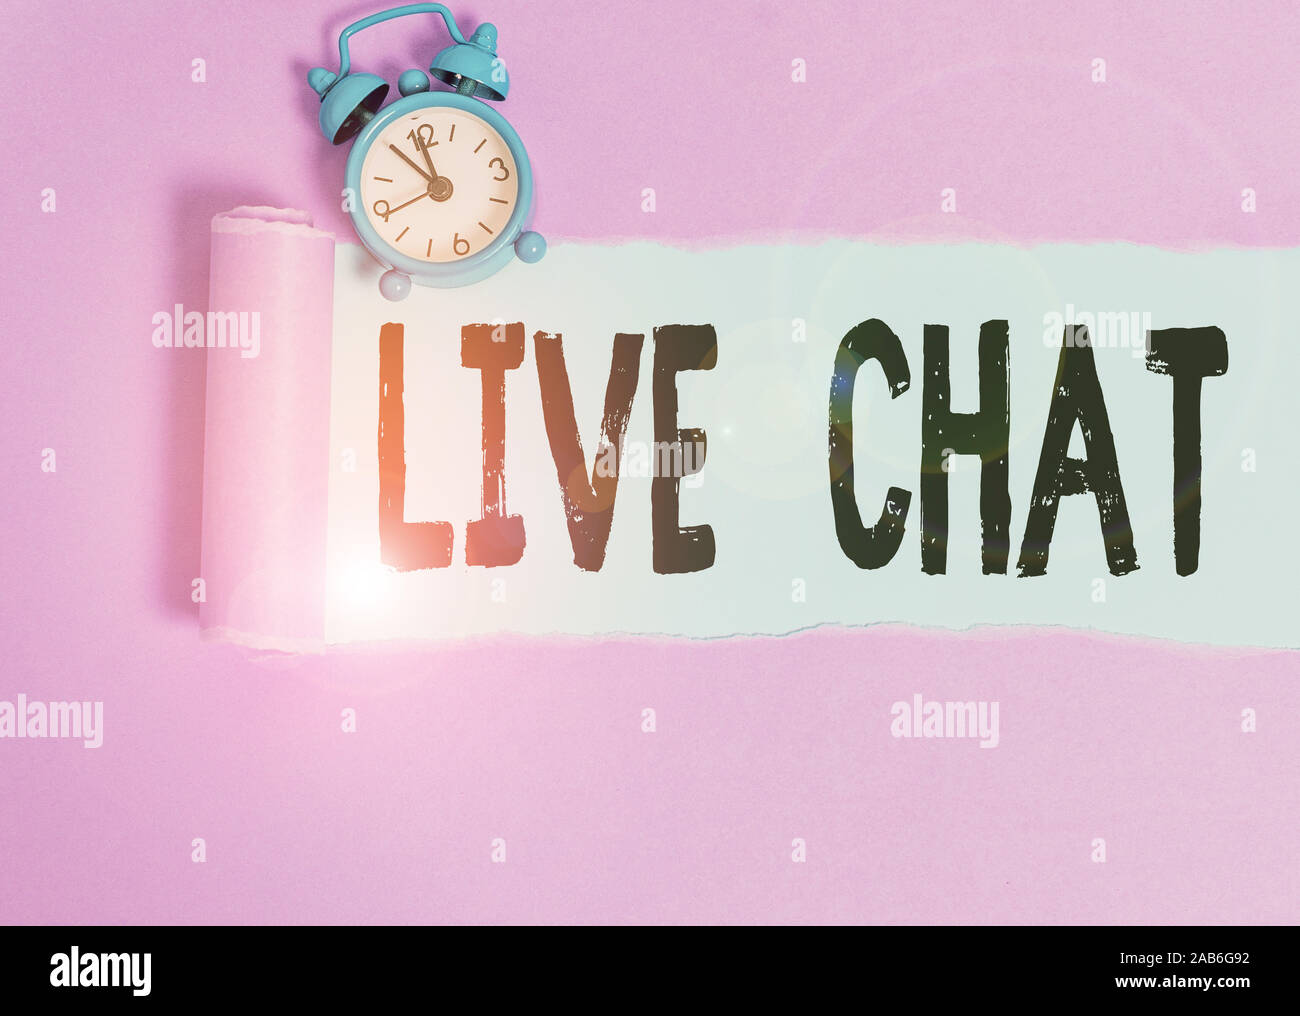 Live chat pc